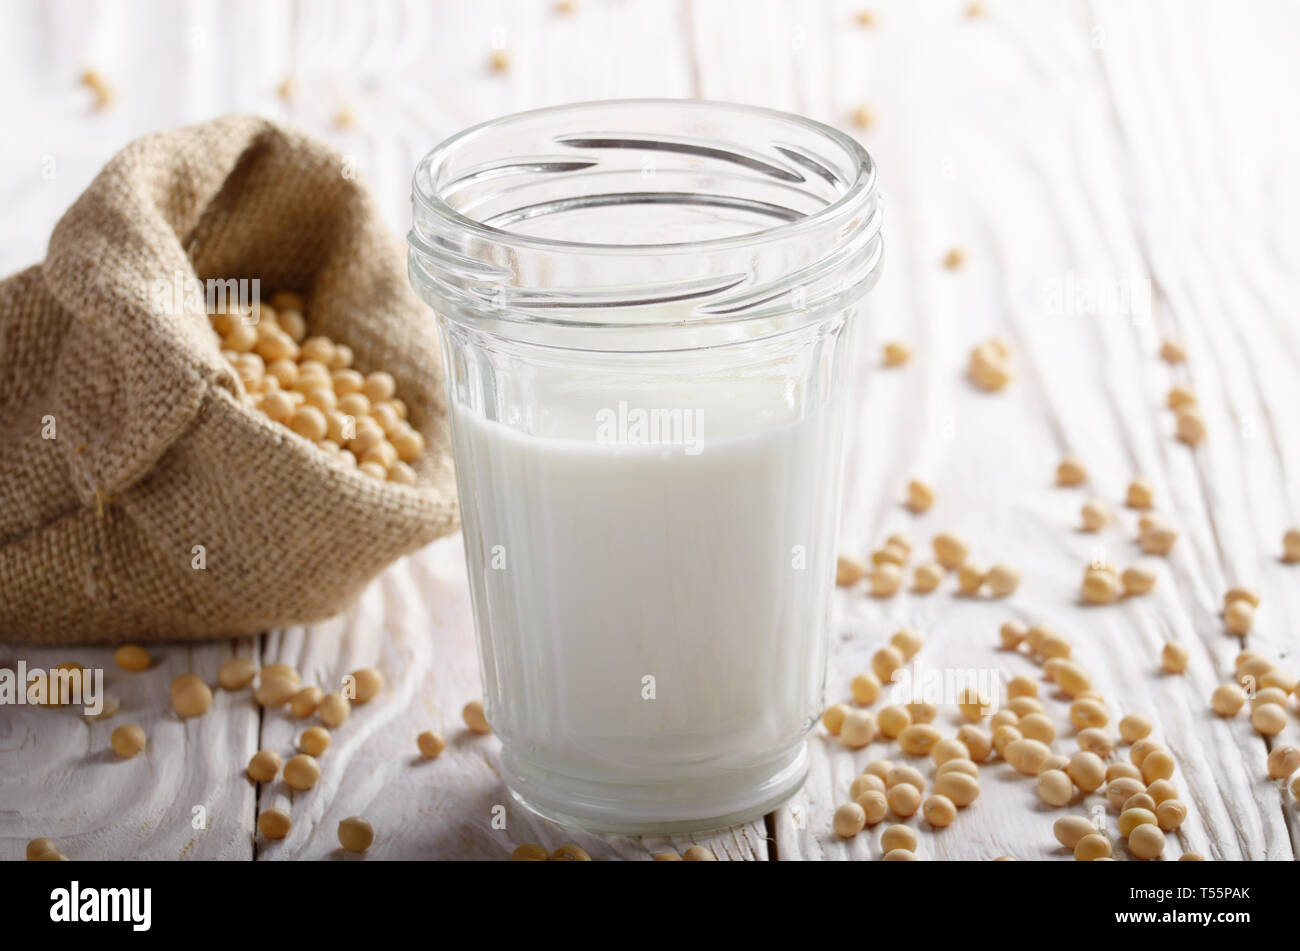 Non-dairy alternative Soy milk or yogurt in mason jar on white wooden table with soybeans in hemp sack Stock Photo